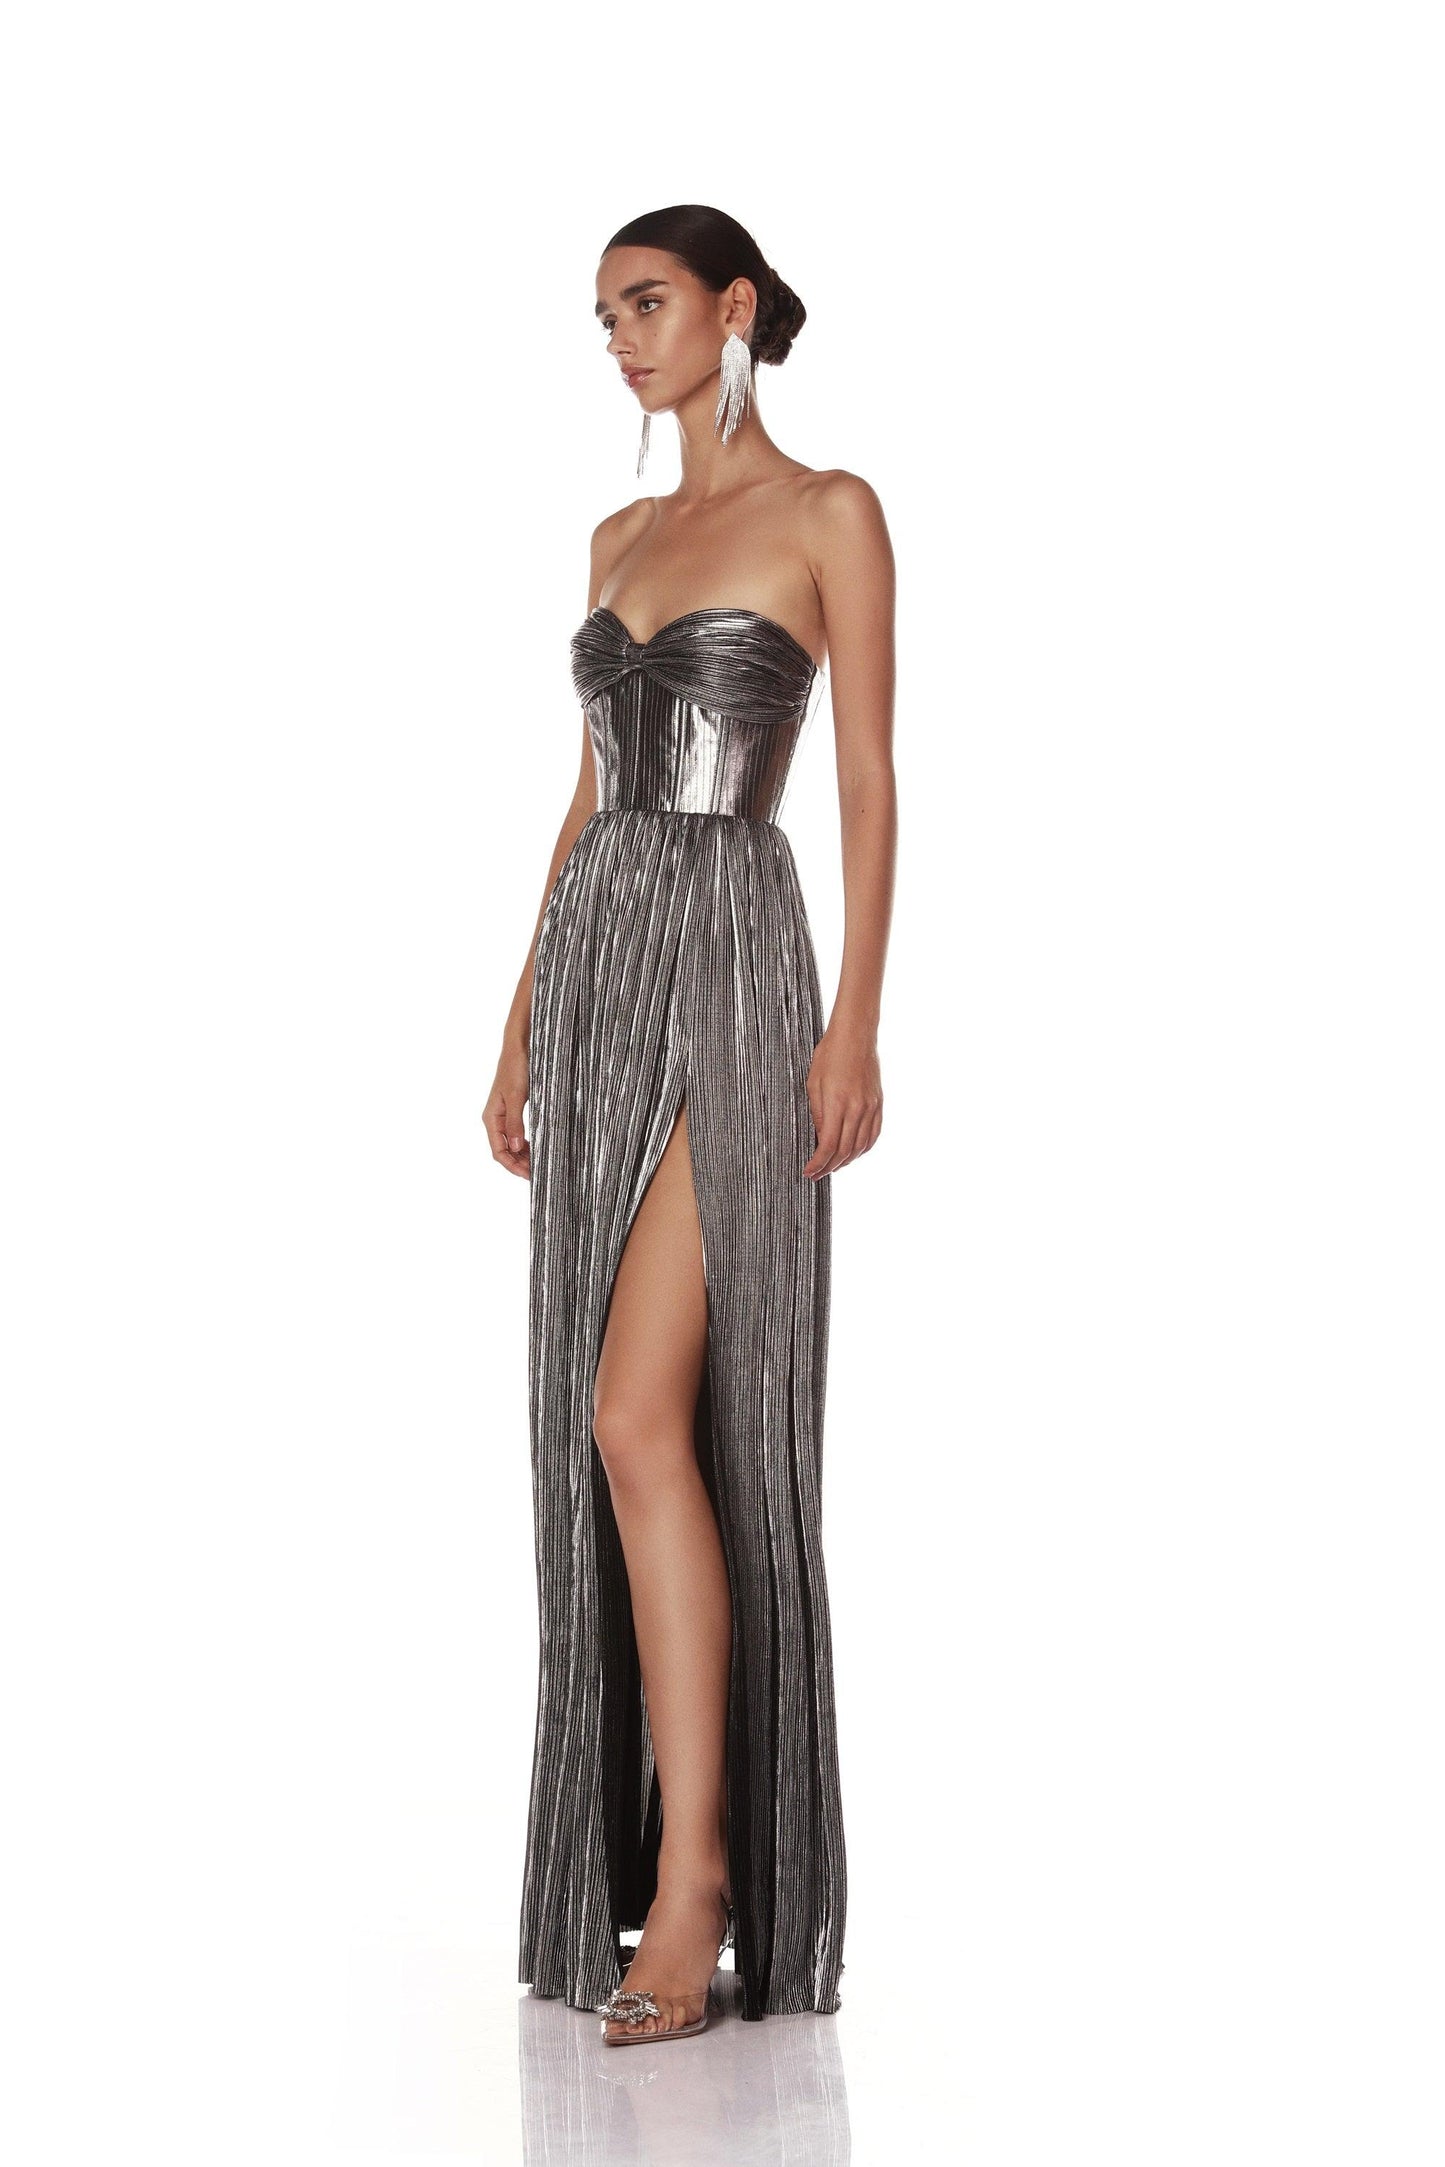 Florence Strapless Silver Gown - BRONX AND BANCO